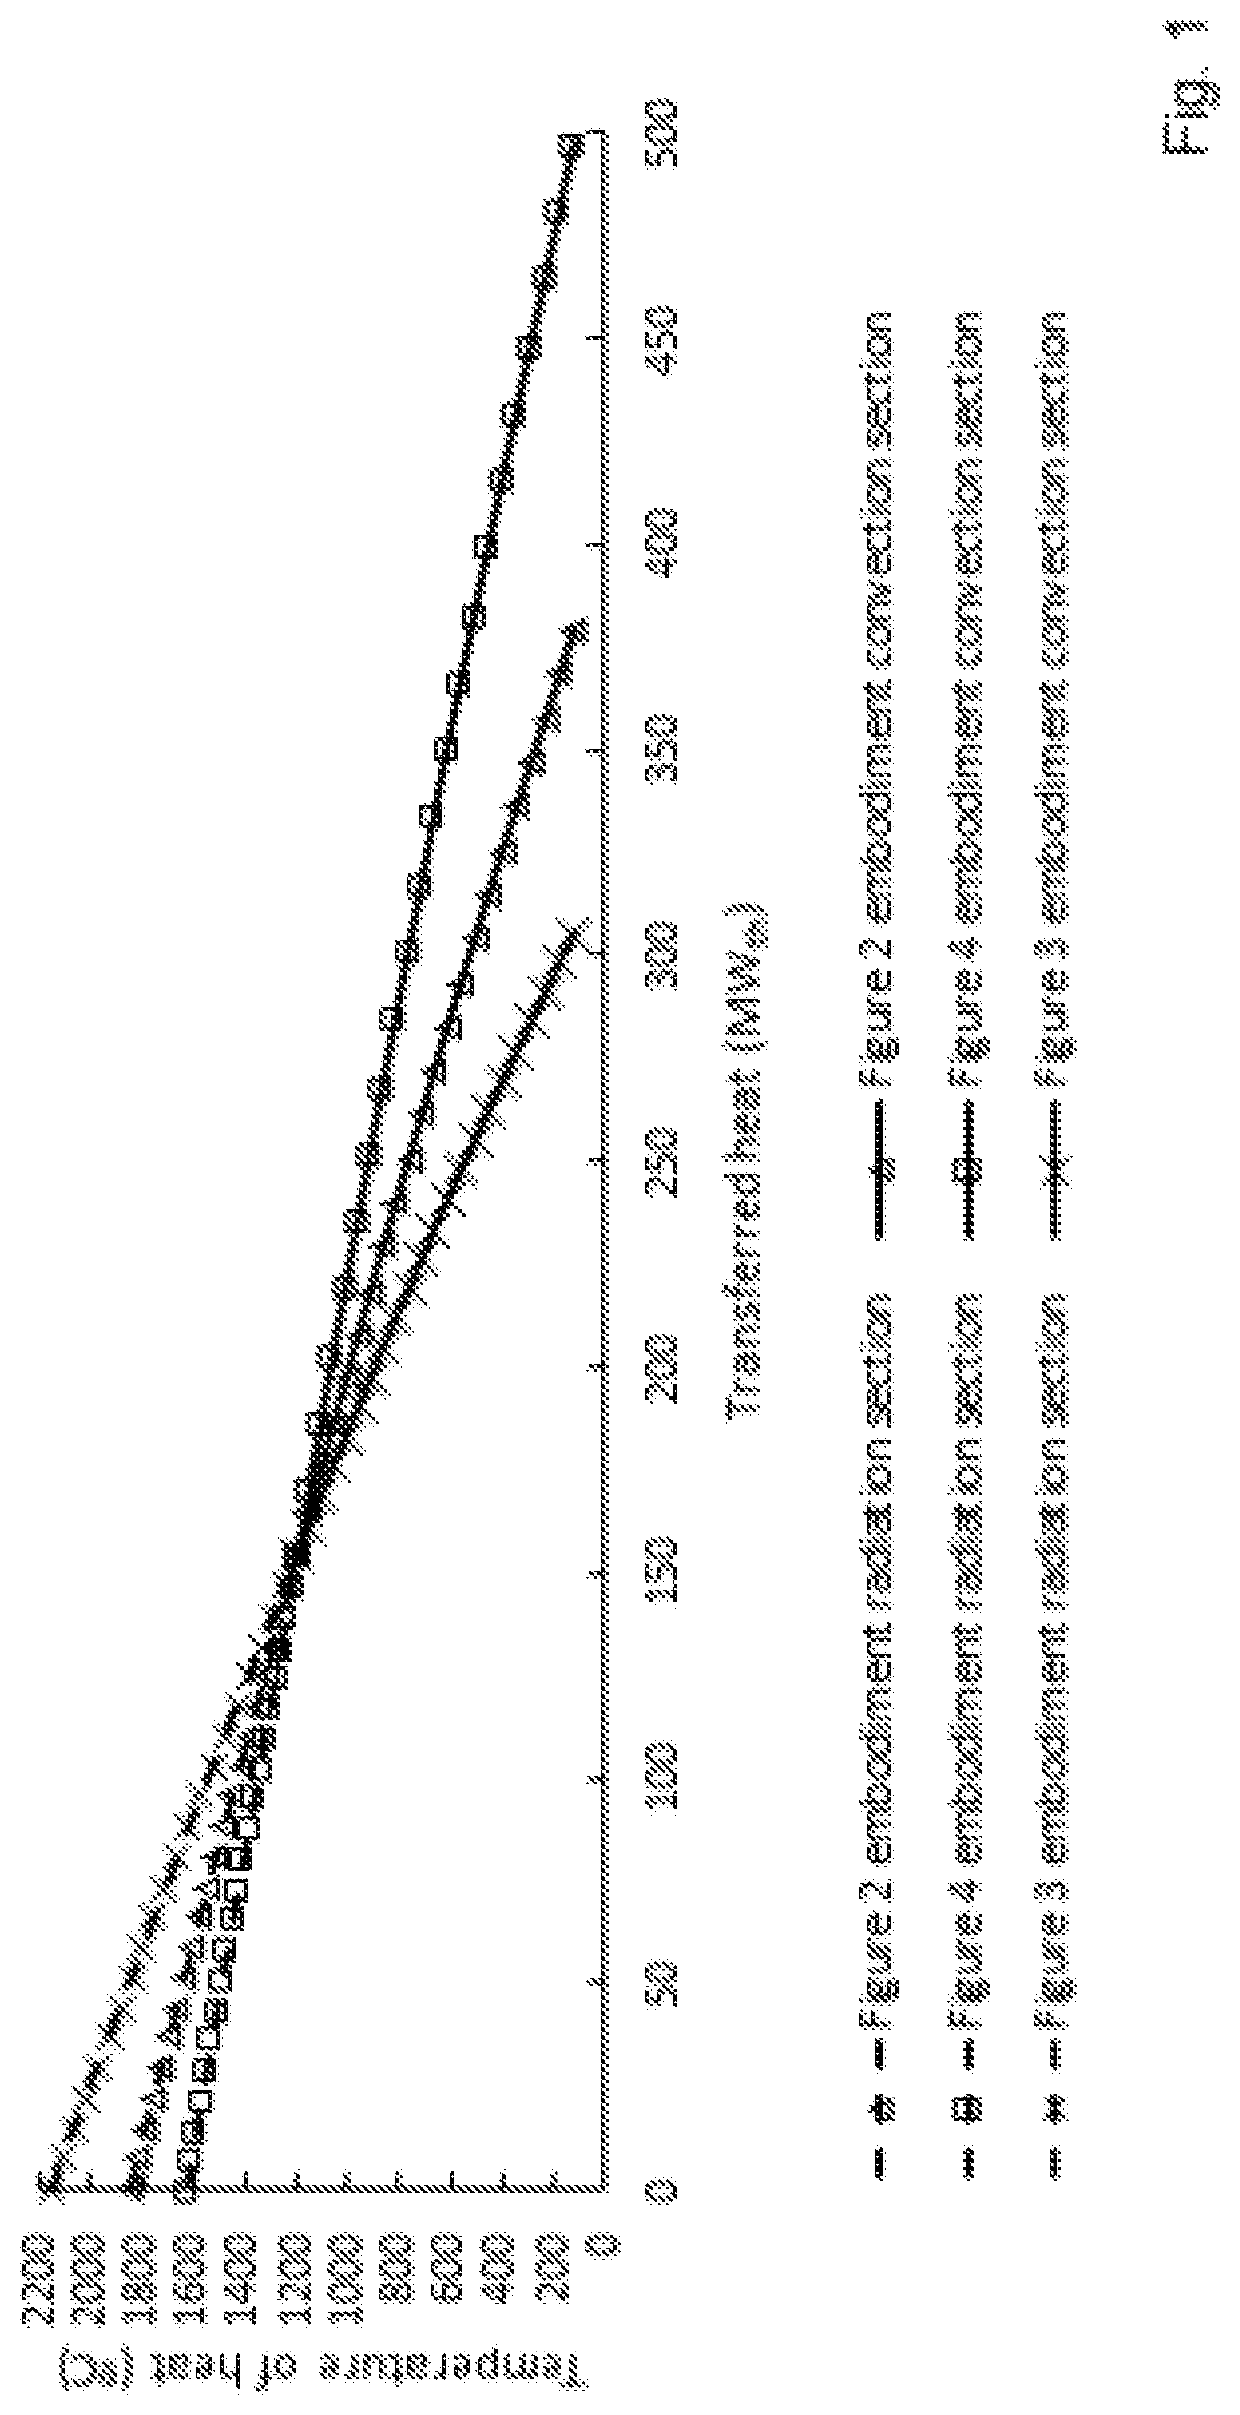 Process for cracking hydrocarbon stream using flue gas from gas turbine